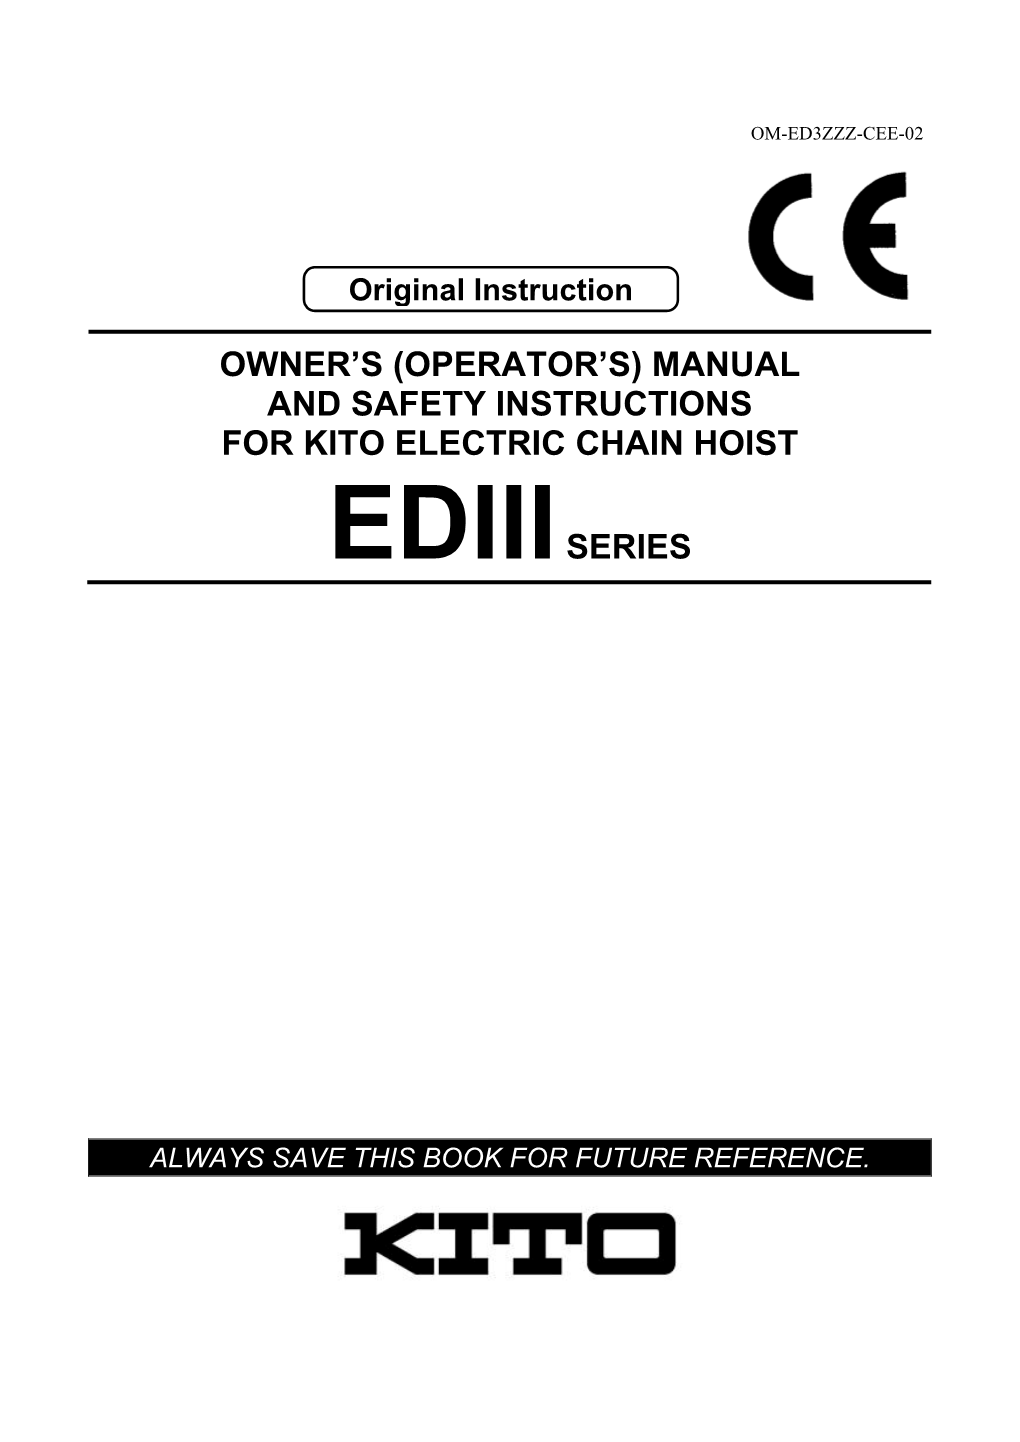 Owner's (Operator's) Manual and Safety